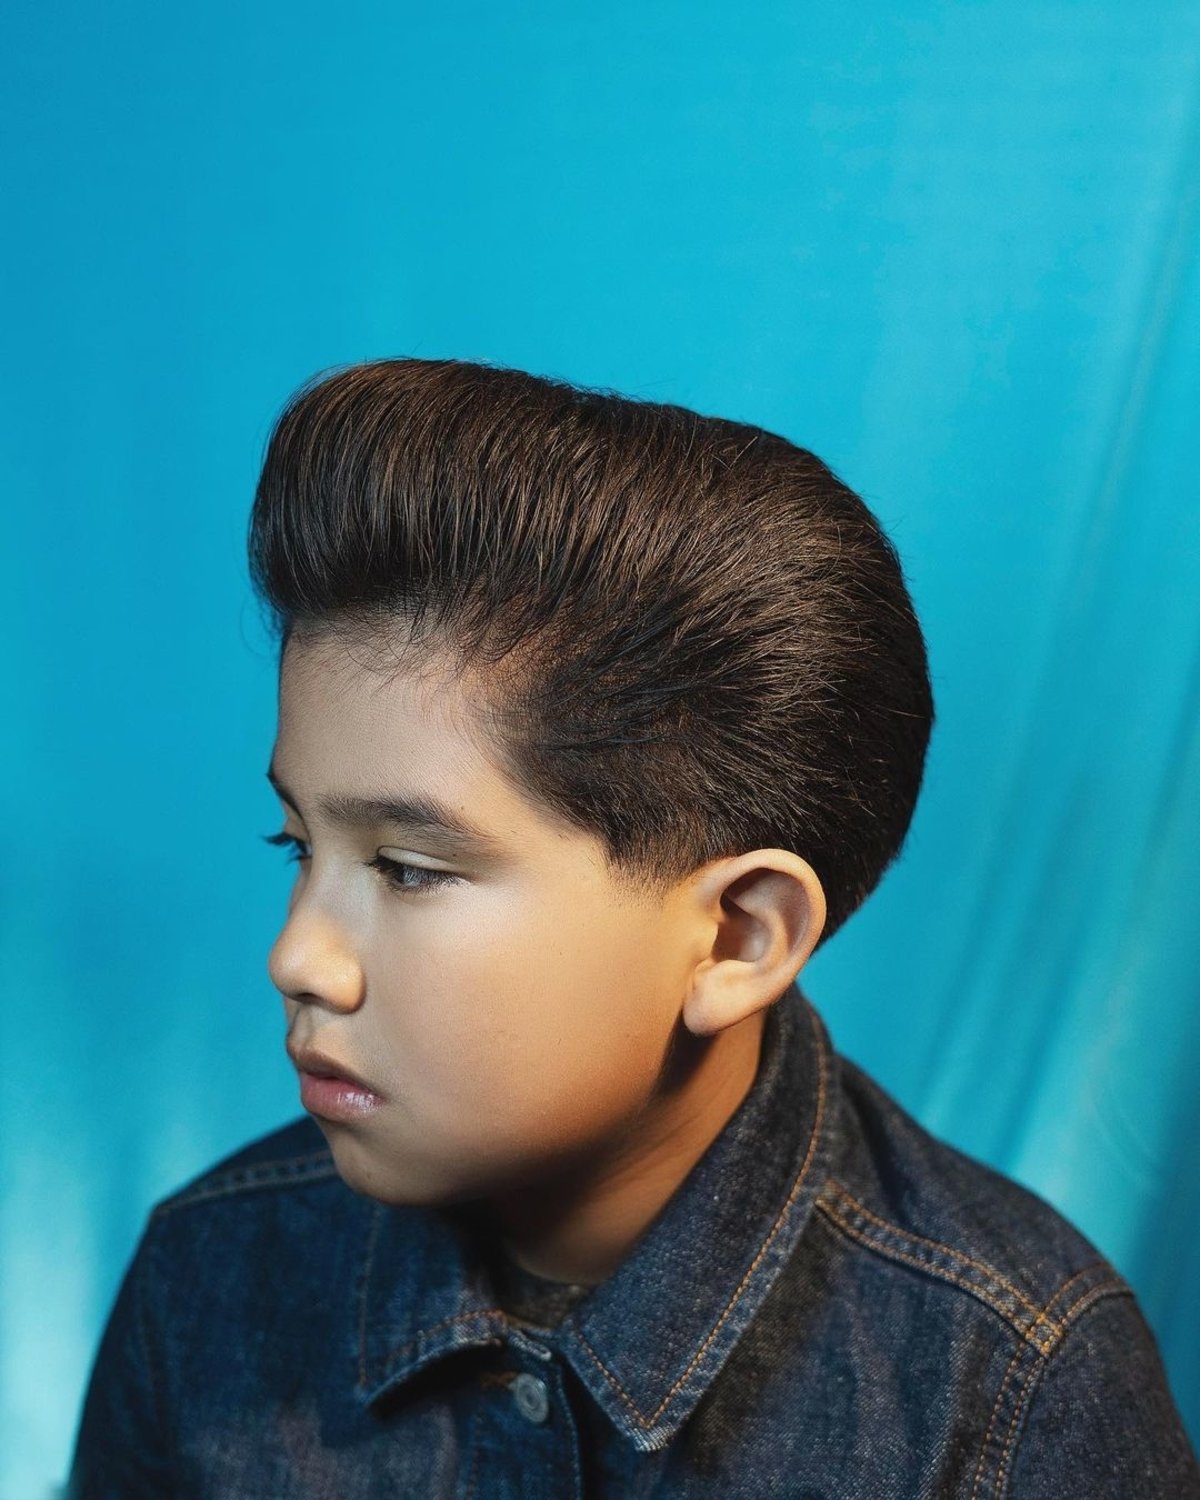 Indian boys hair style image Stock Photos - Page 1 : Masterfile